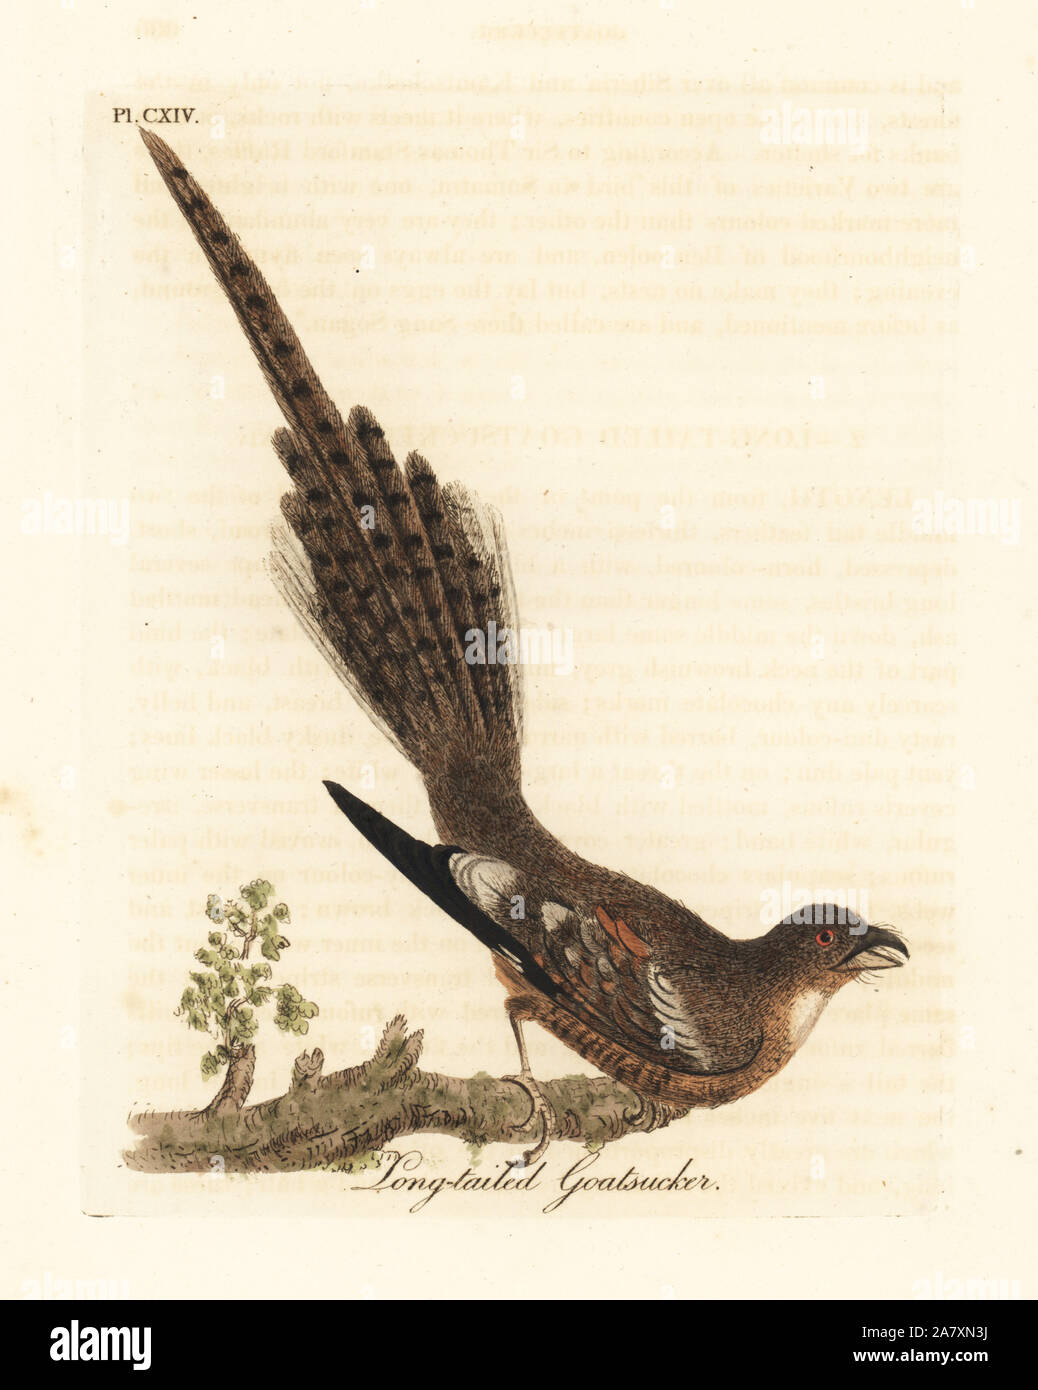 Long-tailed nightjar, Caprimulgus climacurus (Long-tailed goatsucker). Handcoloured copperplate drawn and engraved by John Latham from his own A General History of Birds, Winchester, 1823. Stock Photo